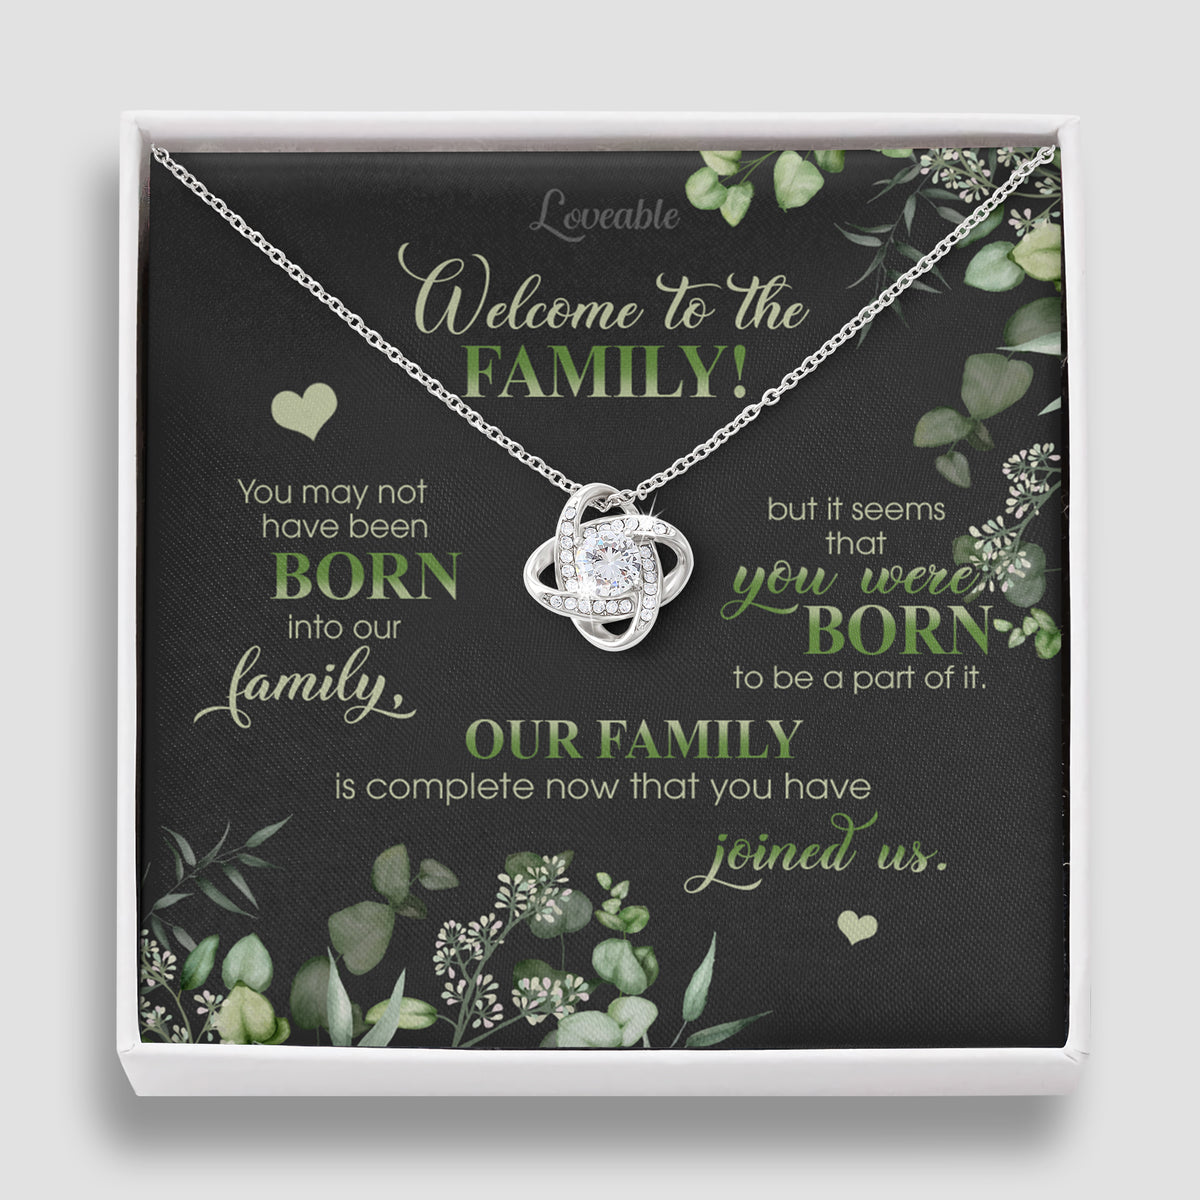 Welcome to the Family - Personalized Necklace - Iron Gifts for Daughter-in-law